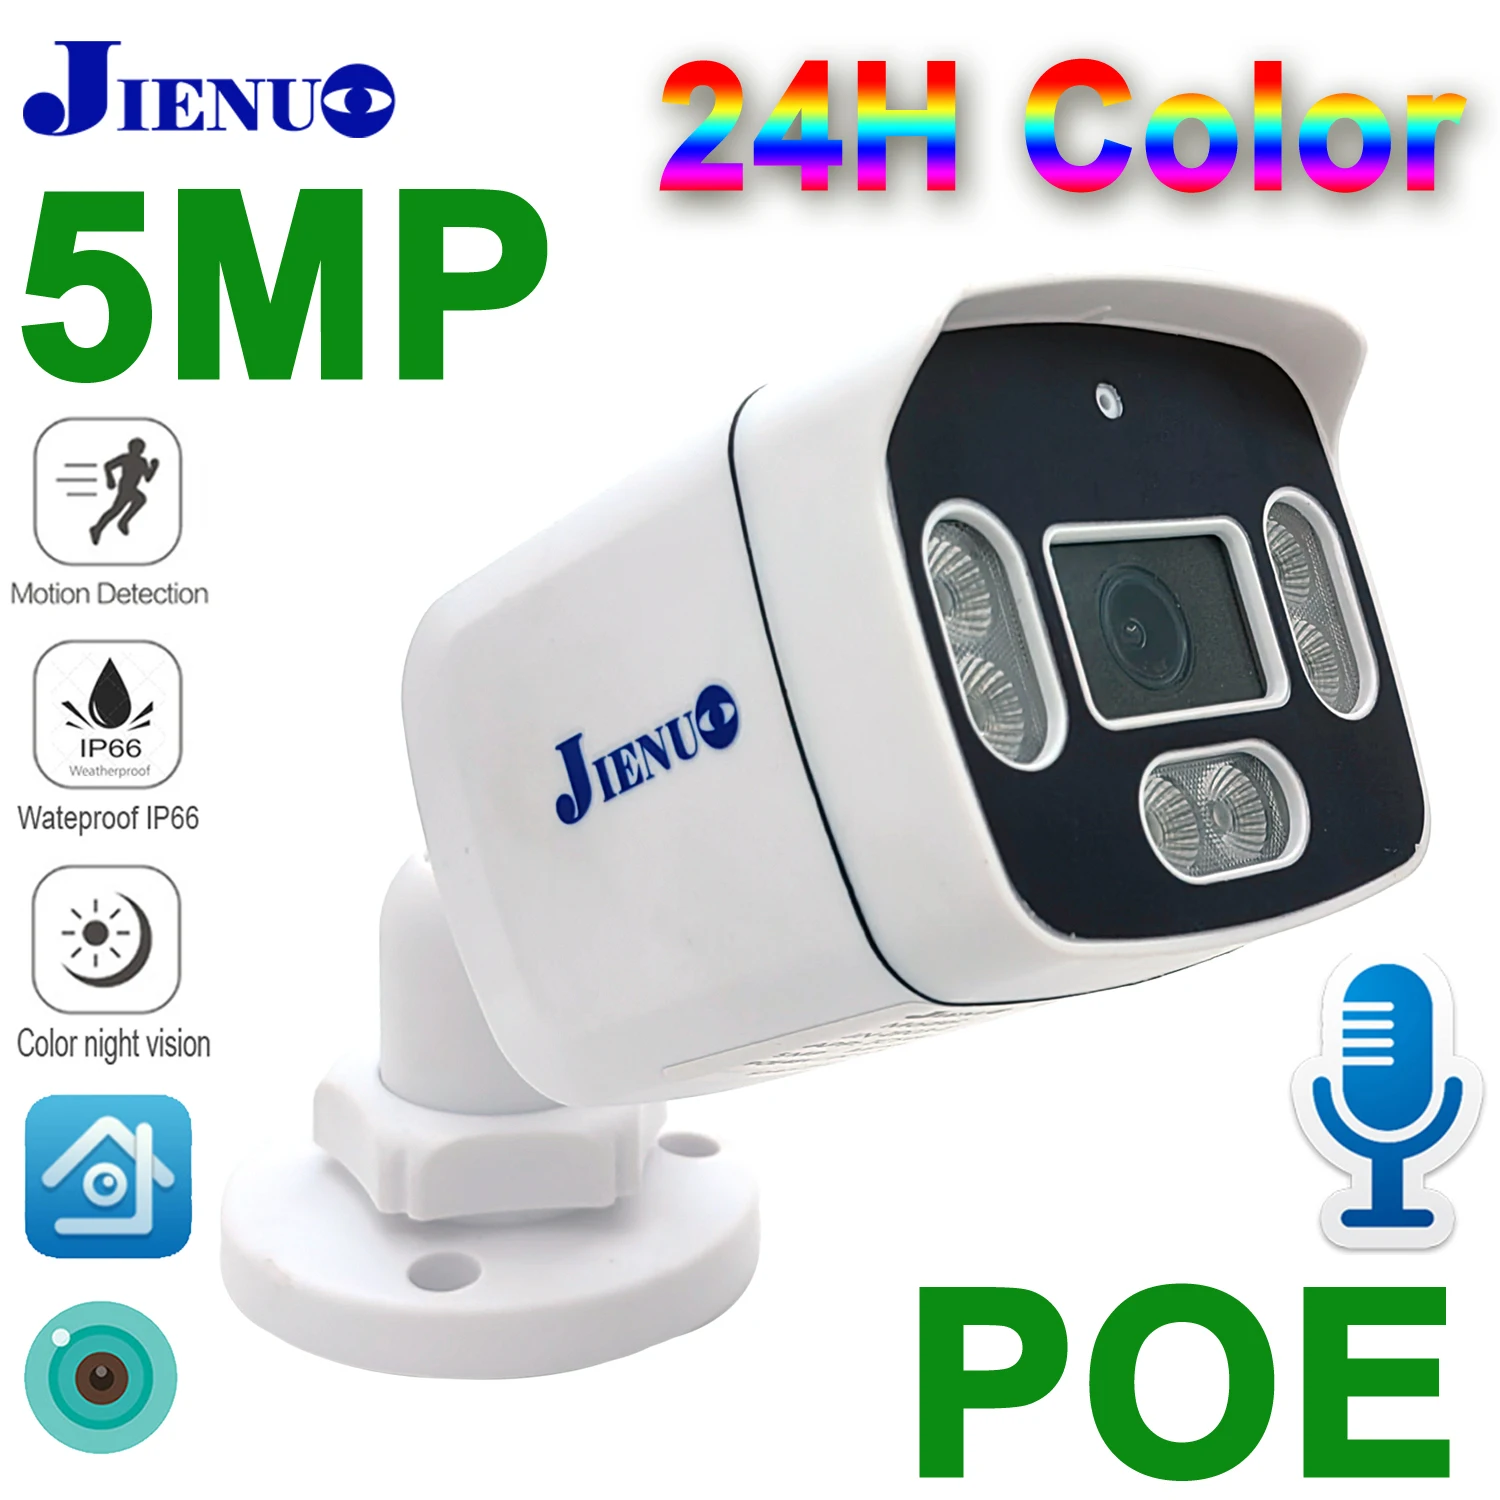 

JIENUO 5MP Night Vision Full Color POE Camera IP Outdoor Waterproof Cctv Security Audio IR Video HD Infrared Home Cam Onvif 4MP